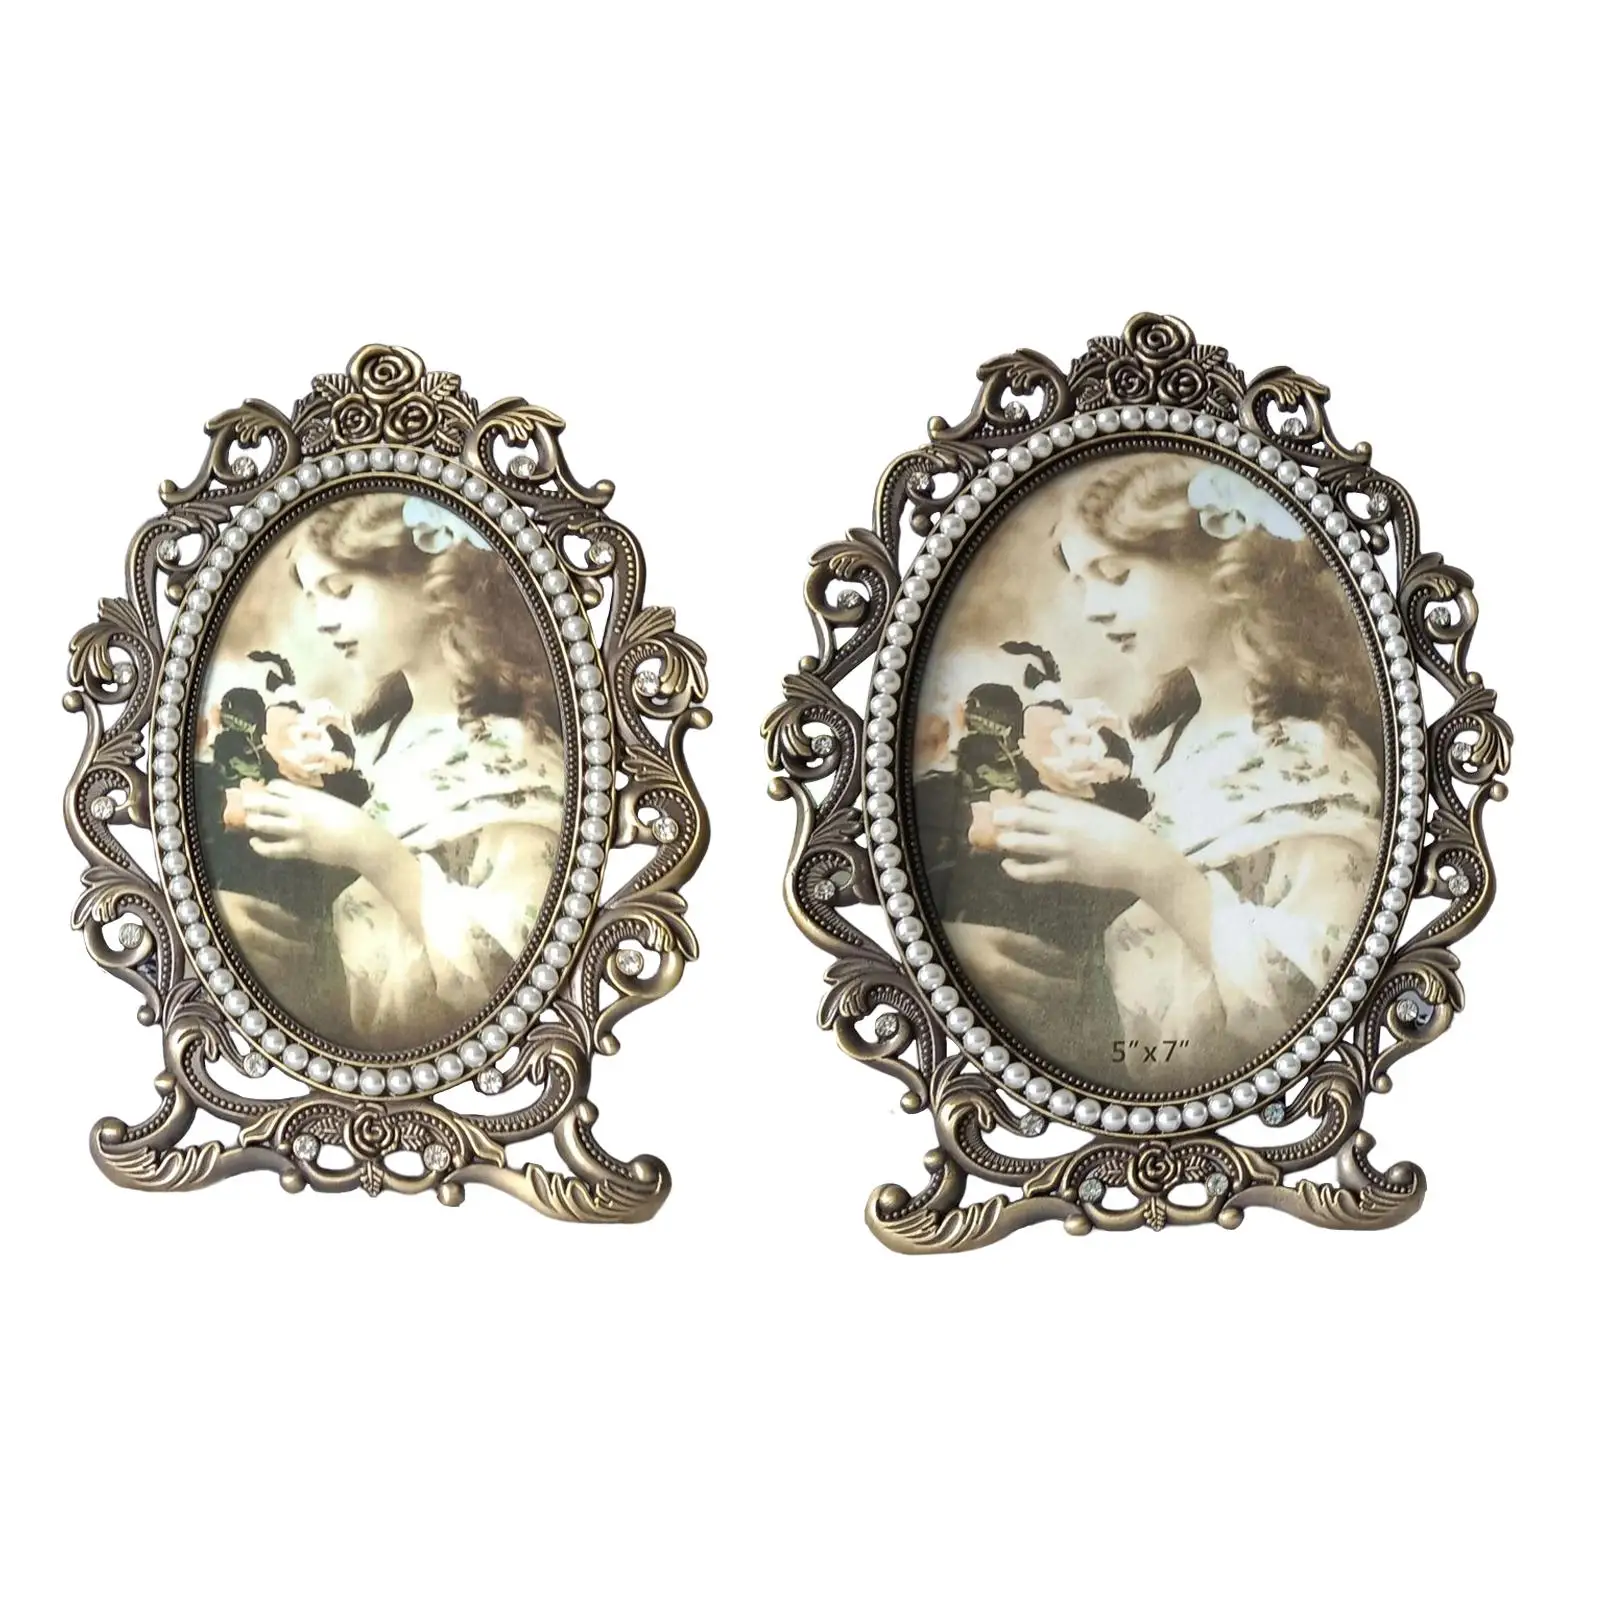 Vintage Bronze Photo Frames with Pearls Picture Holder Deluxe floral Decoration photo Display